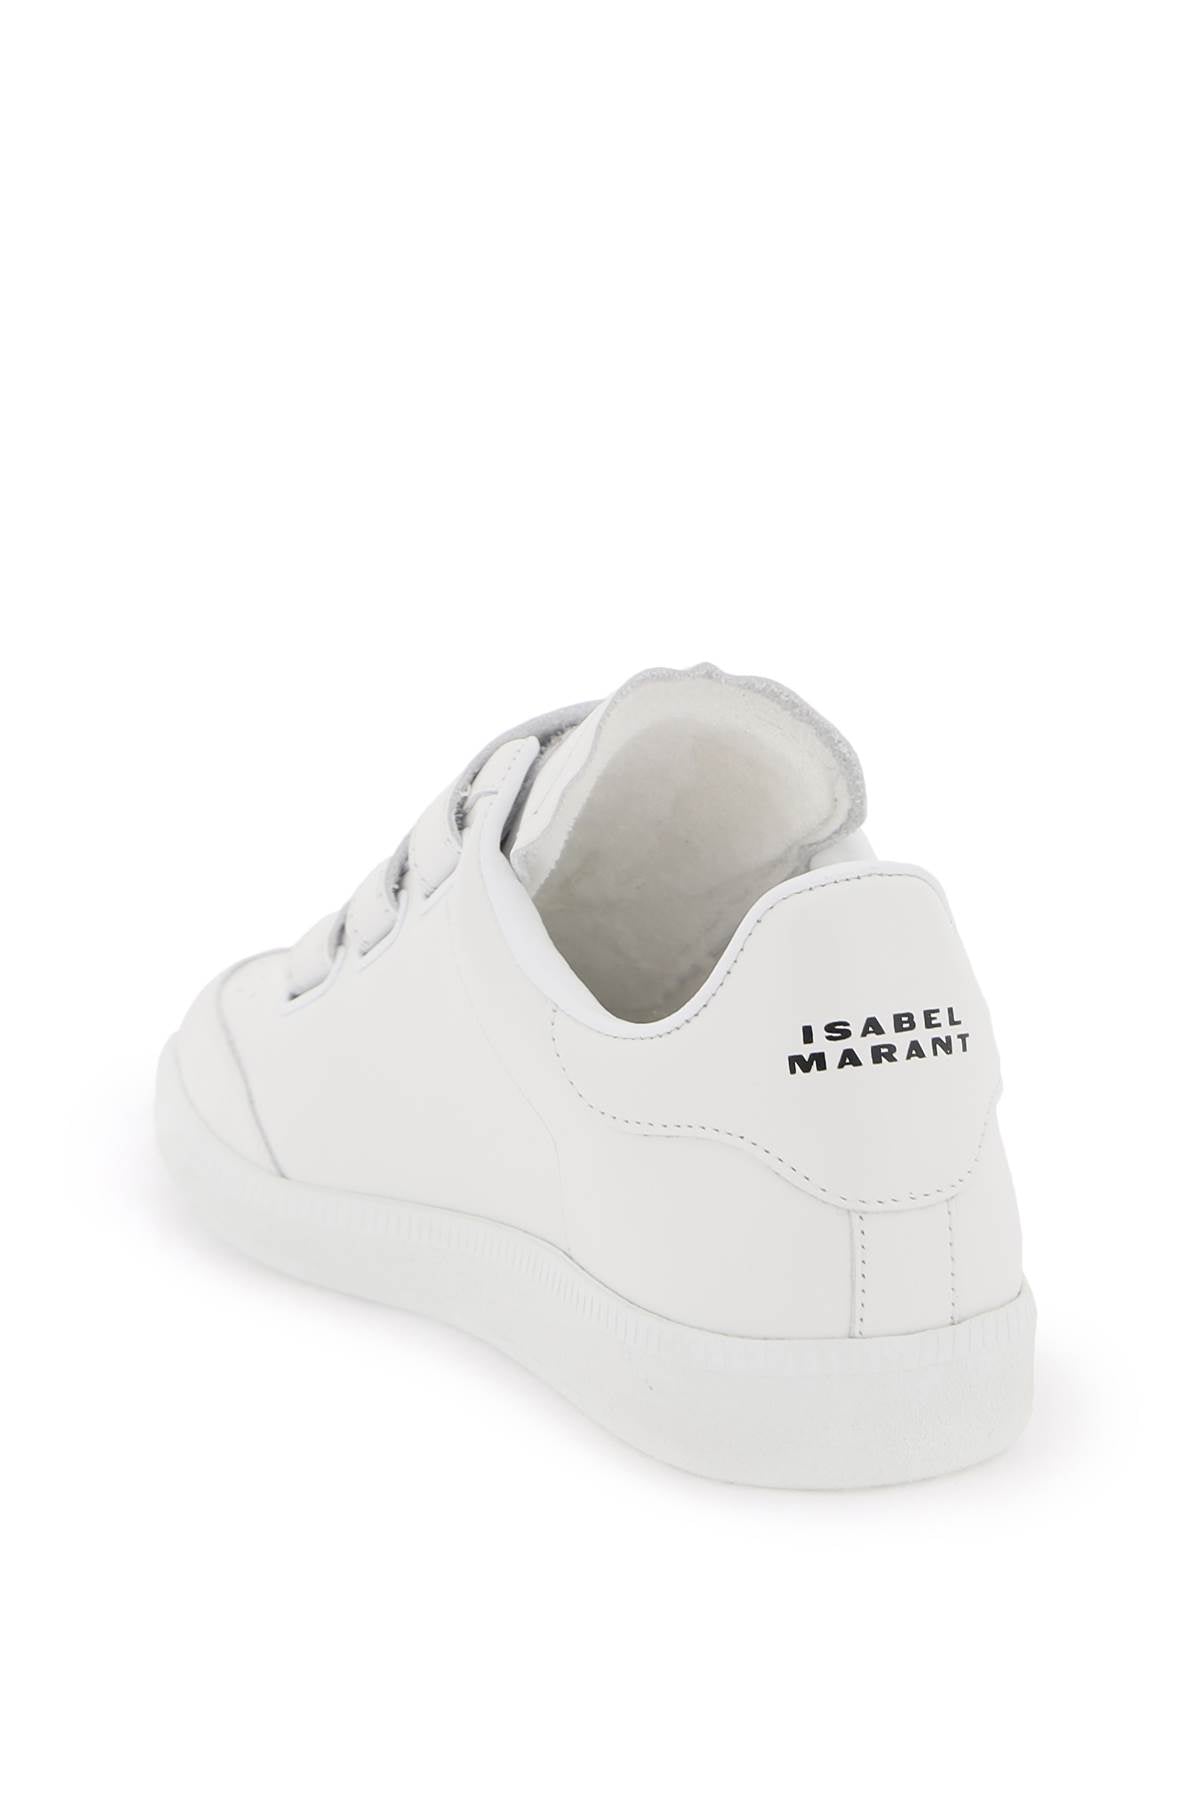 Isabel marant beth leather sneakers-2